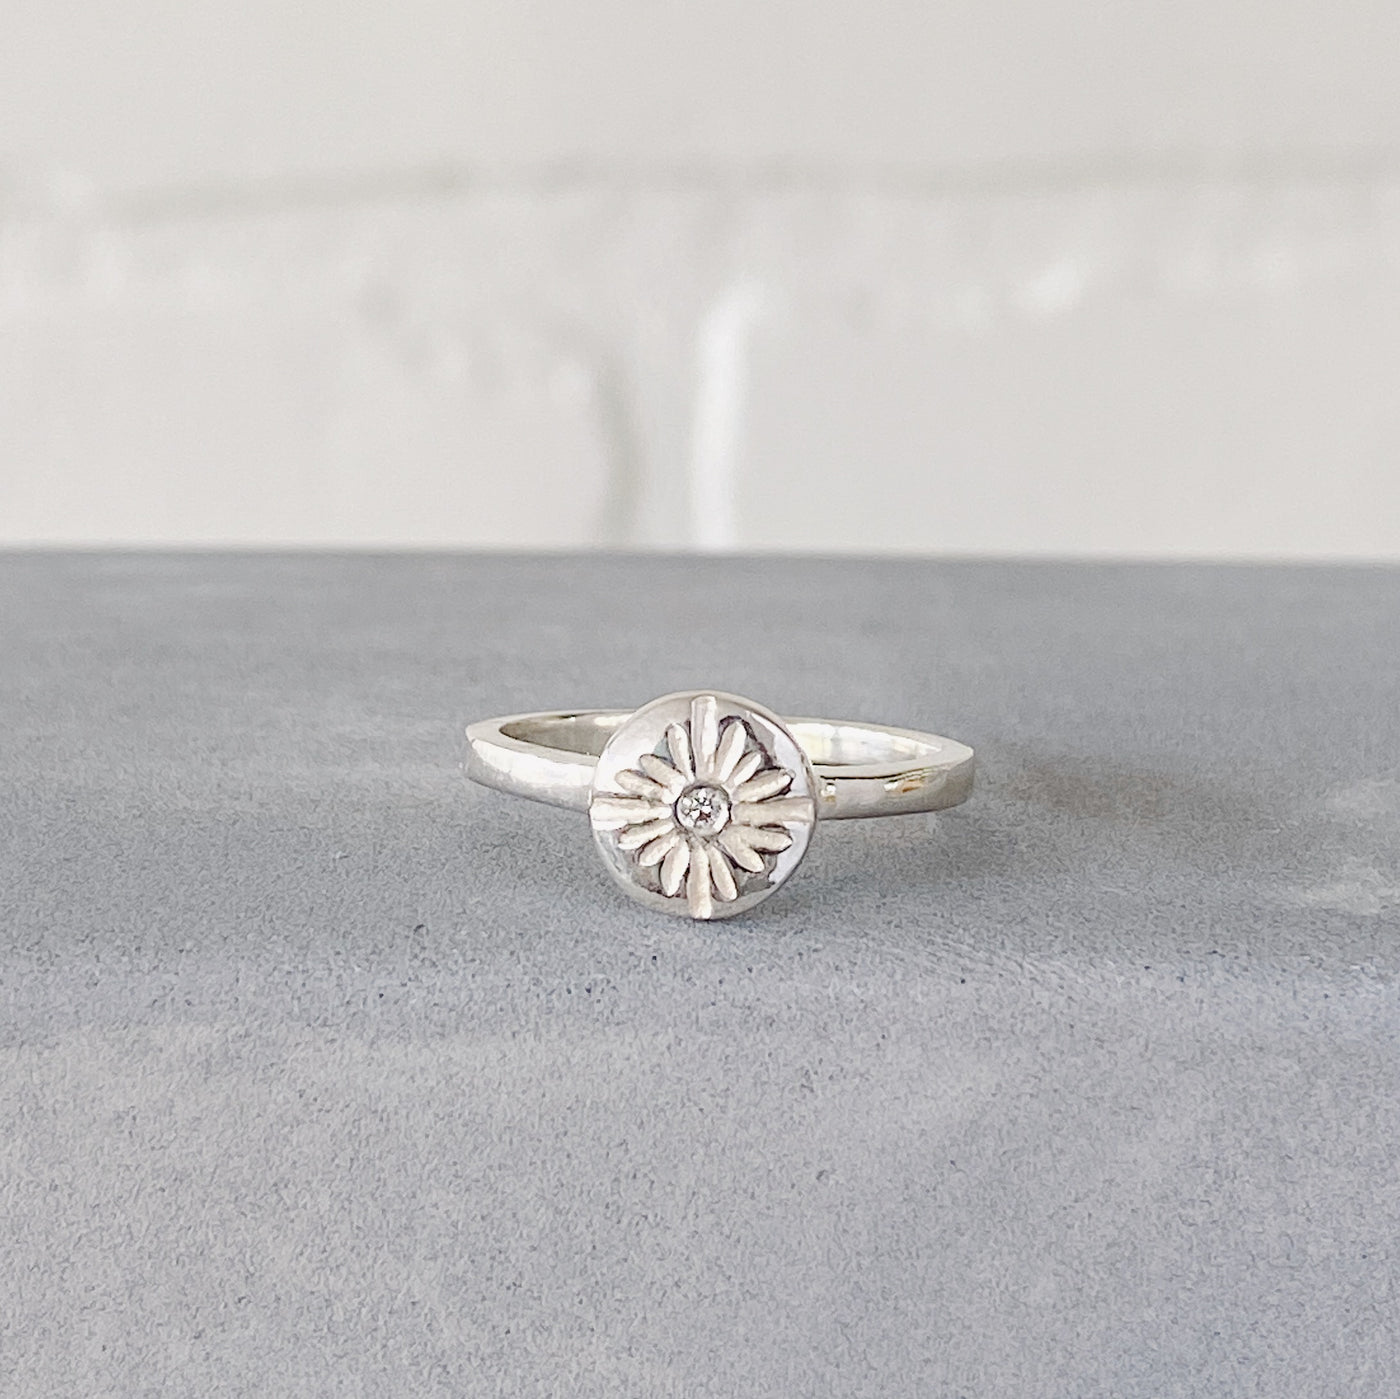 Small carved sunburst ring with a diamond center in sterling silver by Corey Egan